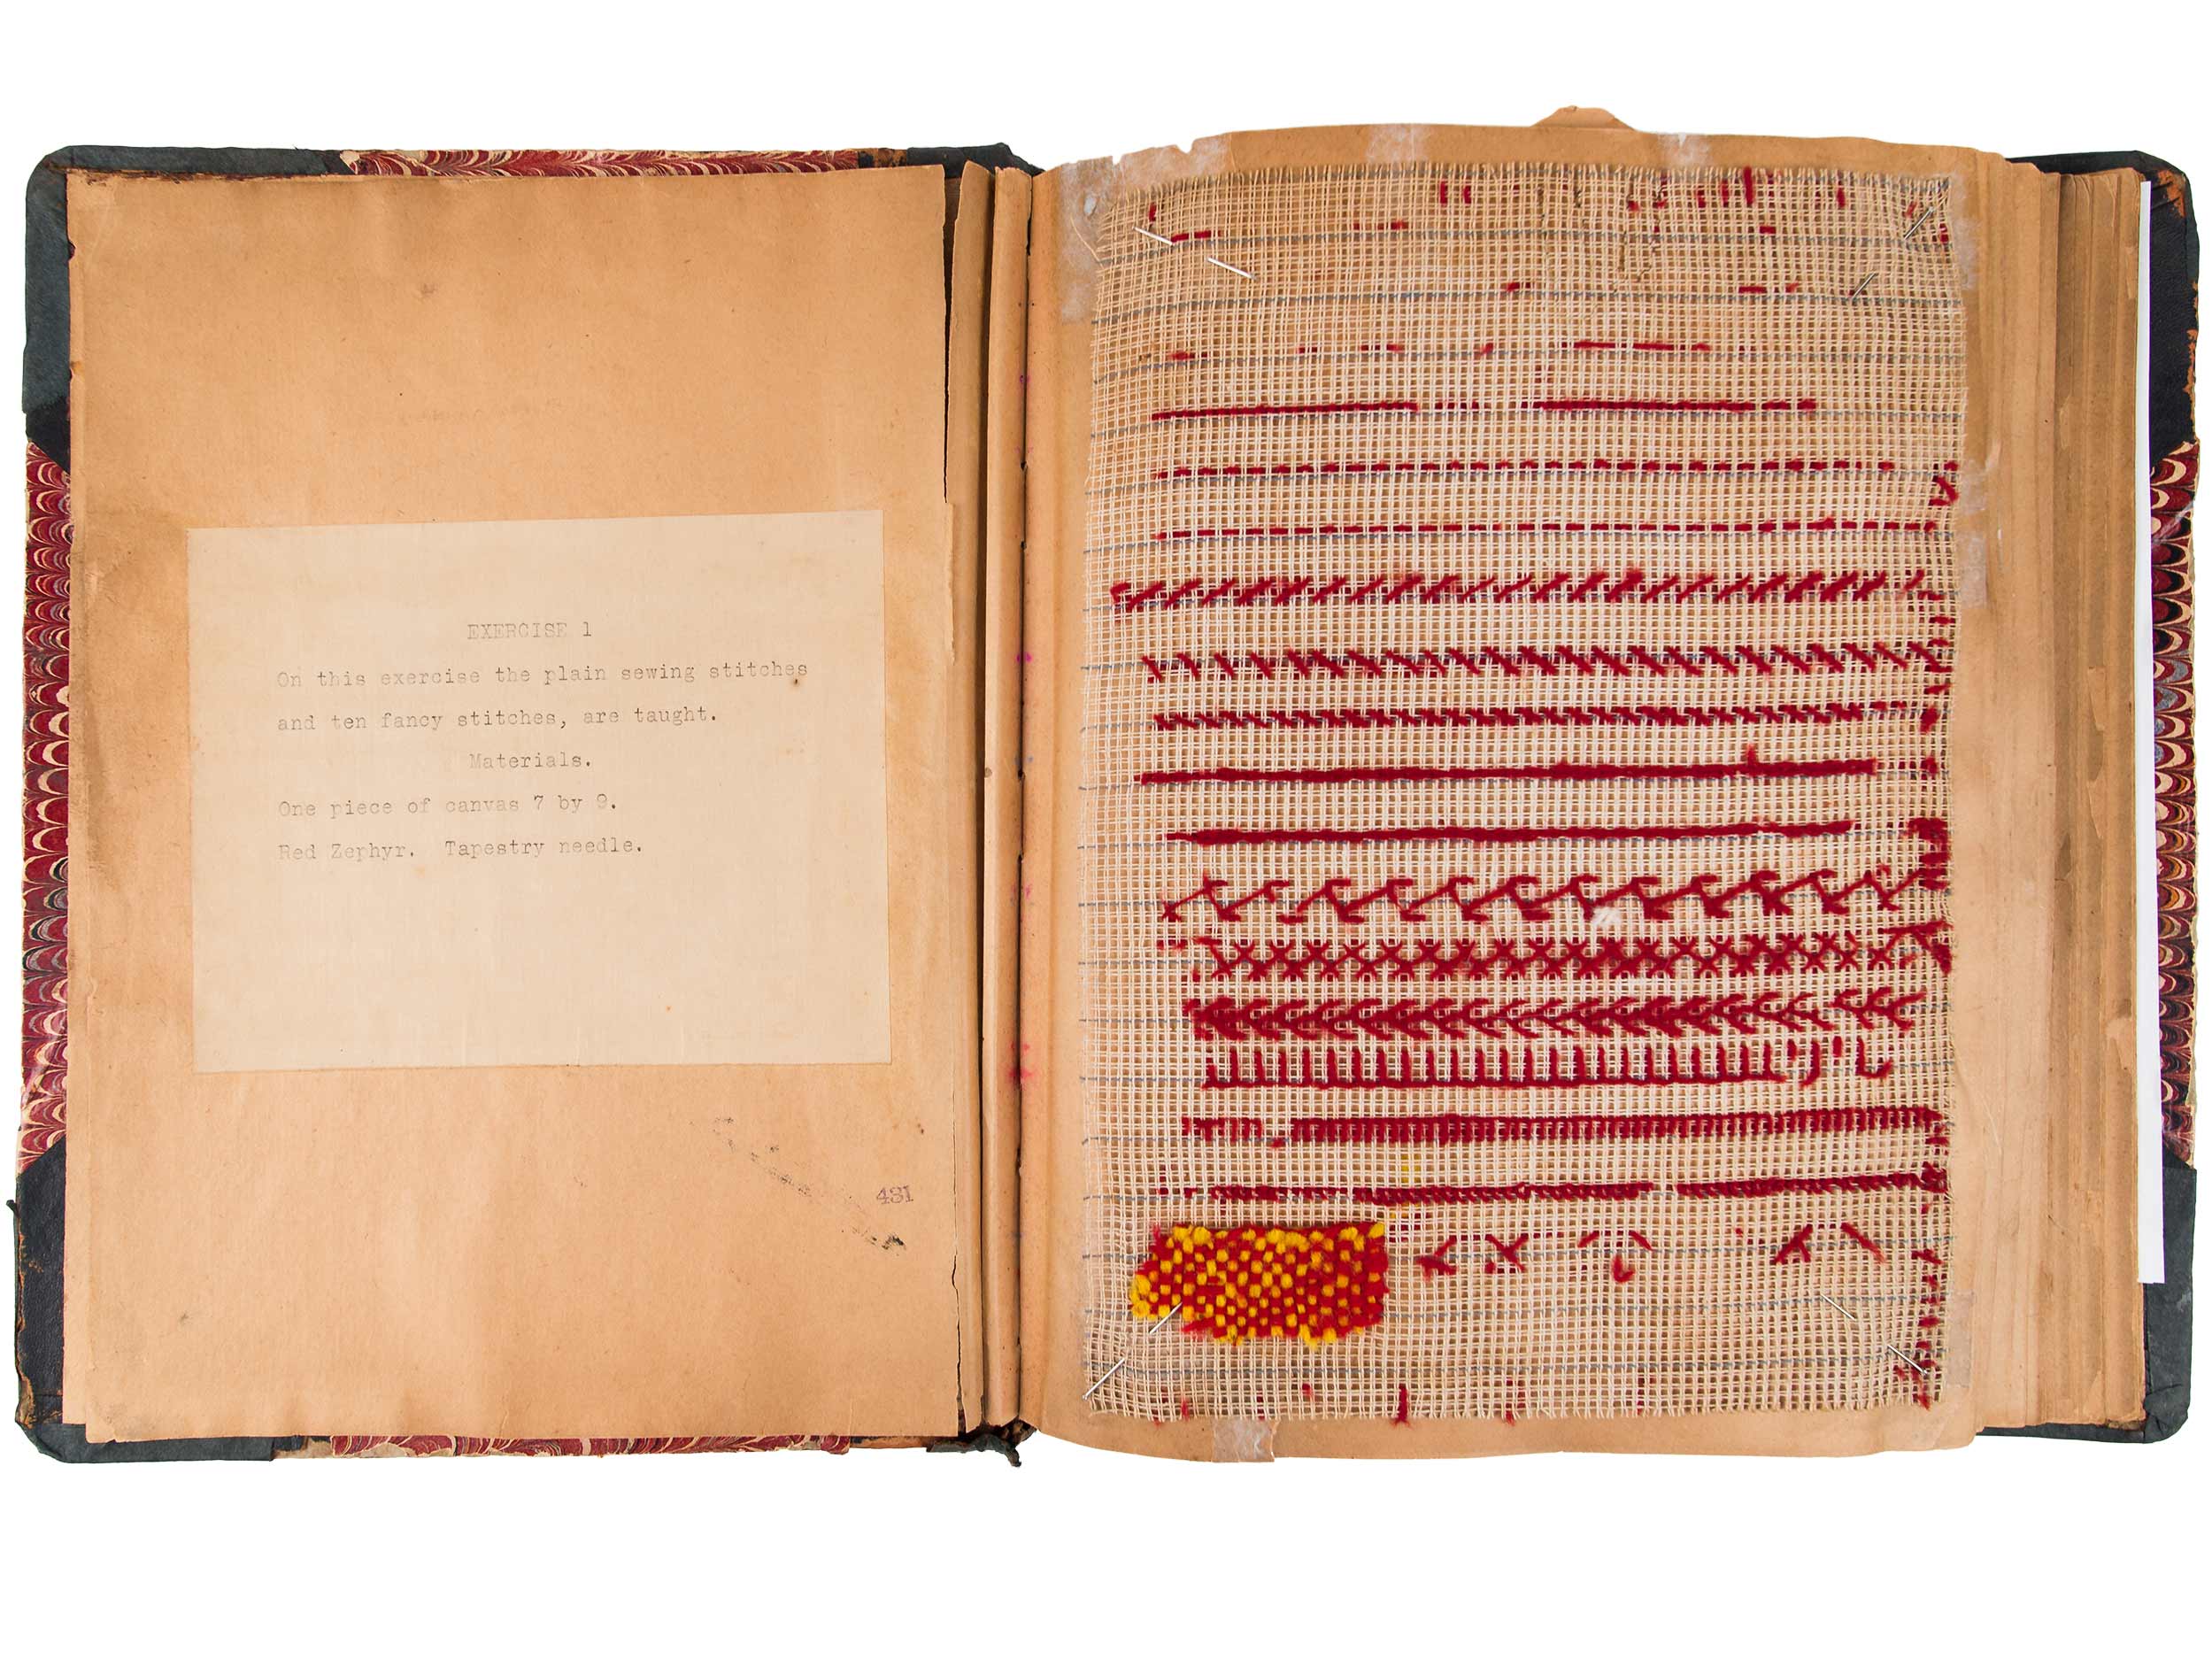 Beatrice Jeannette Whiting's sewing exercise book, ca. 1915